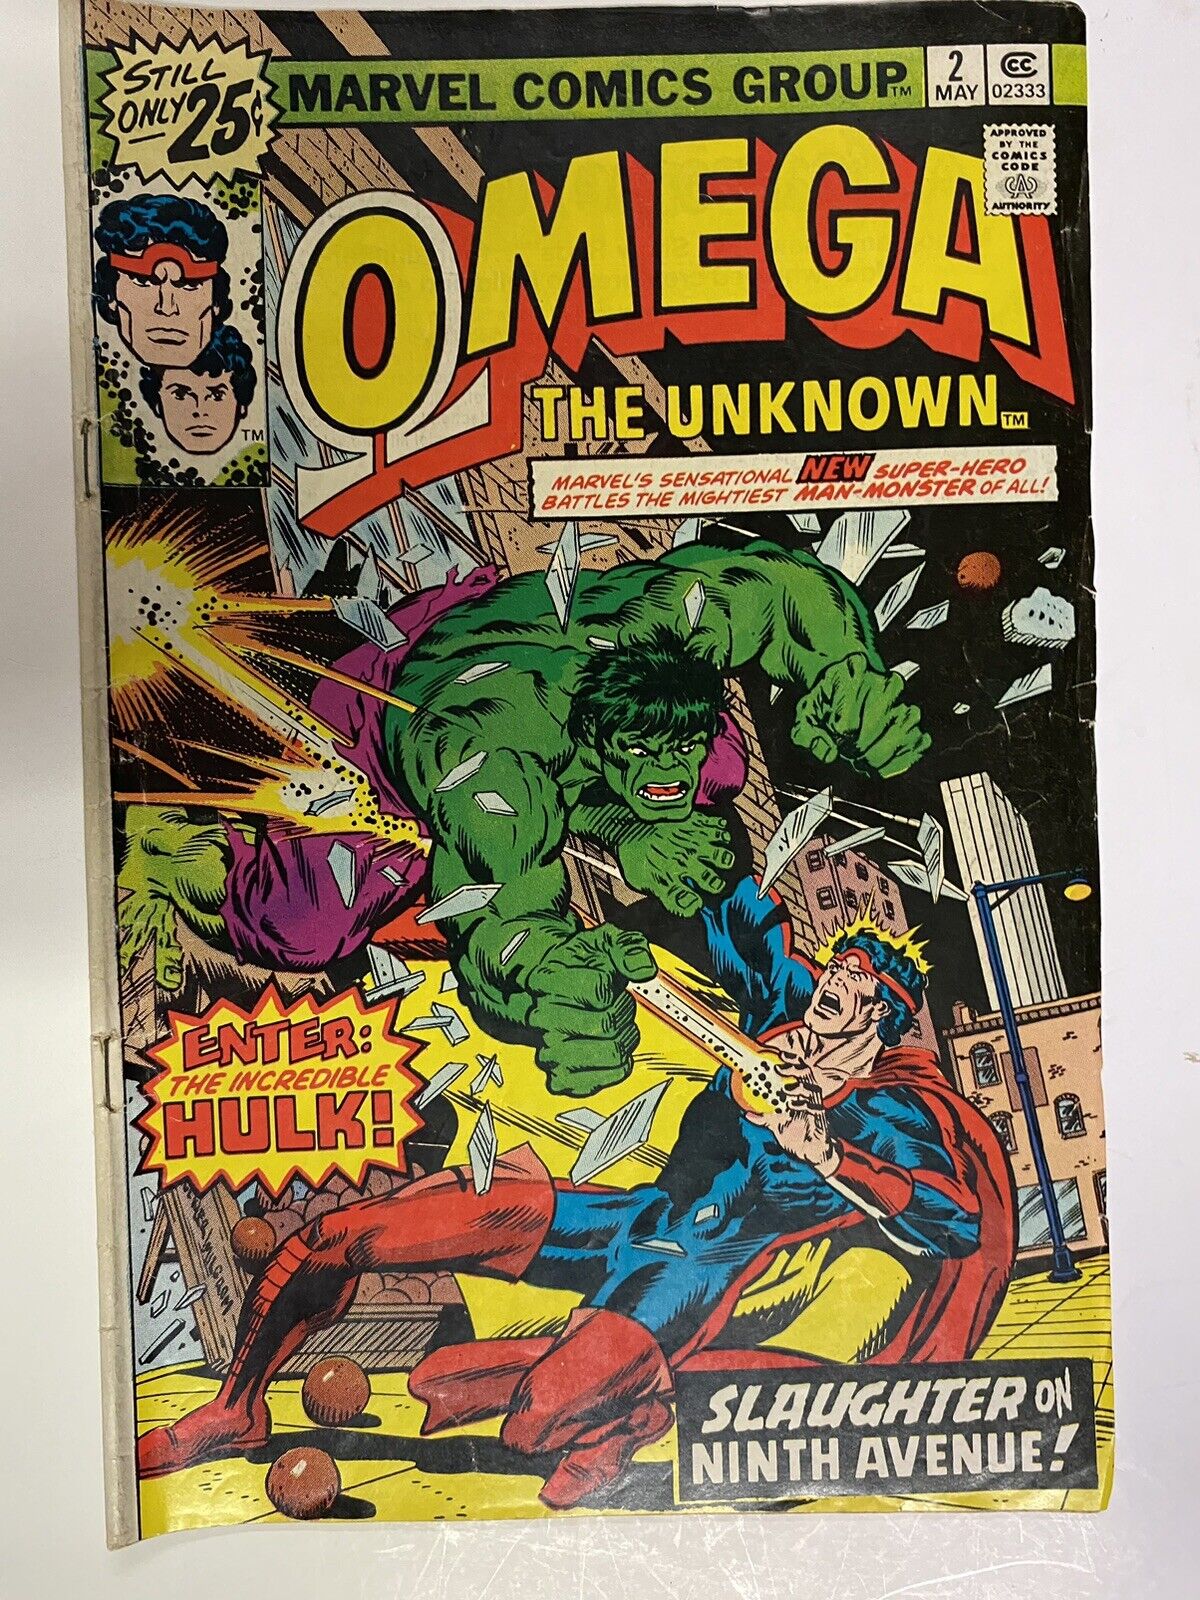 OMEGA THE UNKNOWN #2 ENTER THE HULK